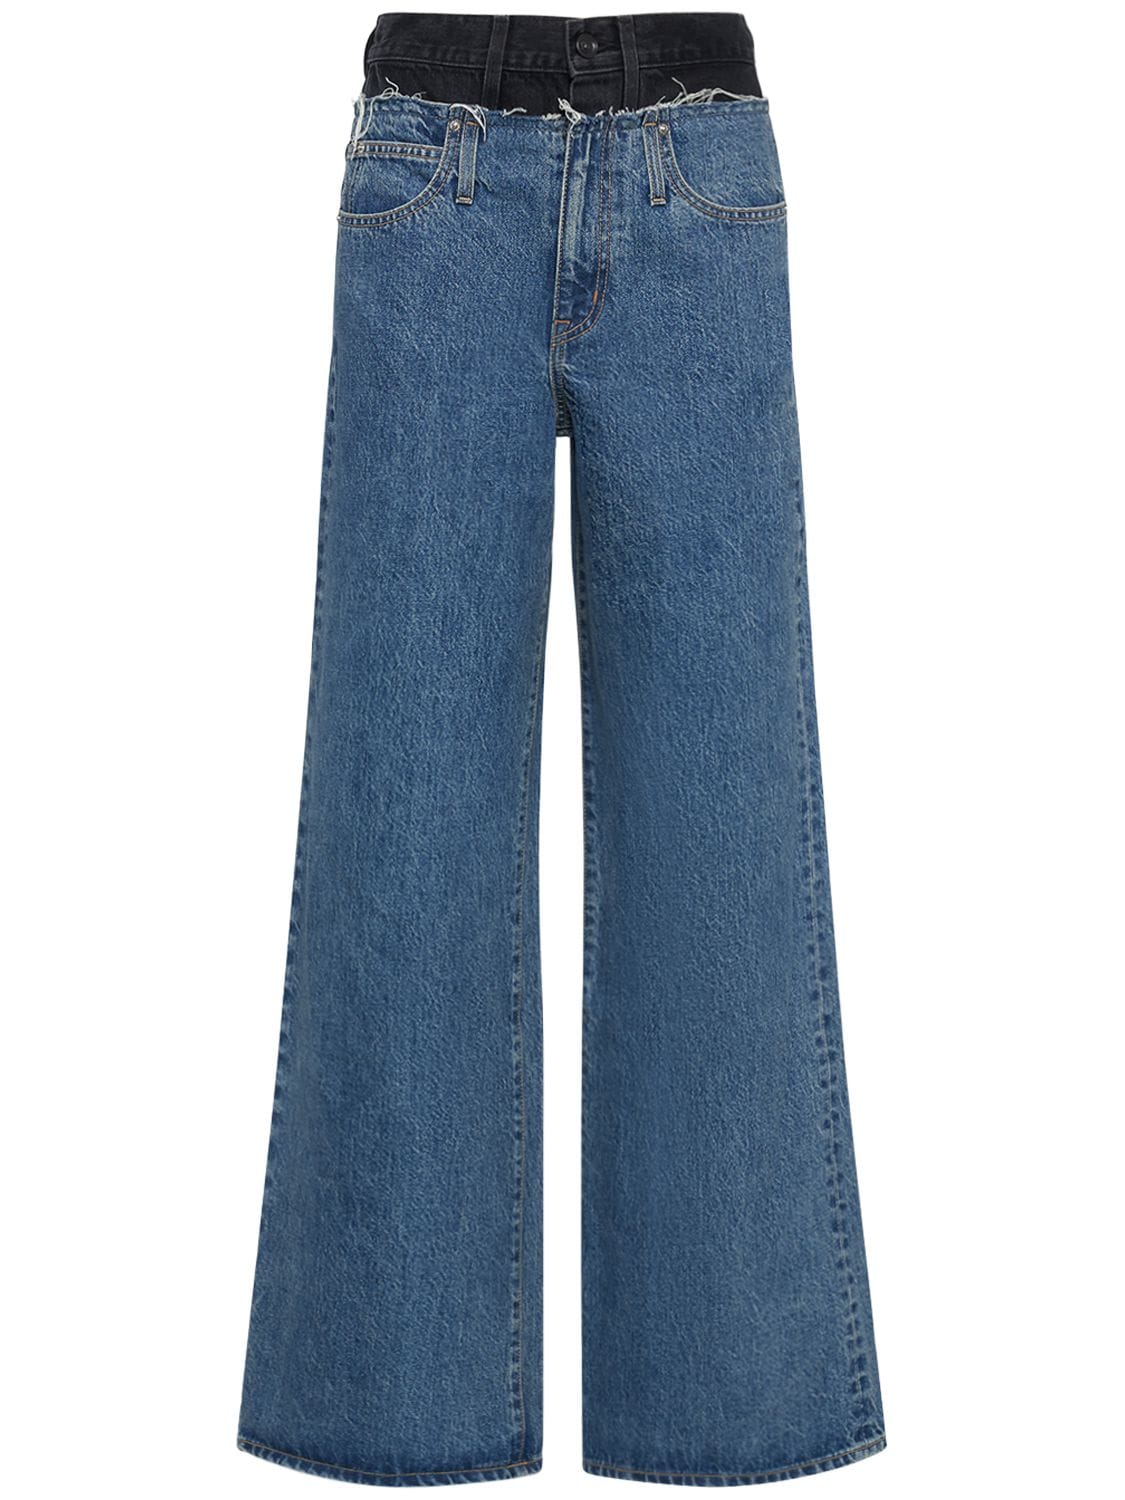 Image of Re-worked Eva Double Waistband Jeans